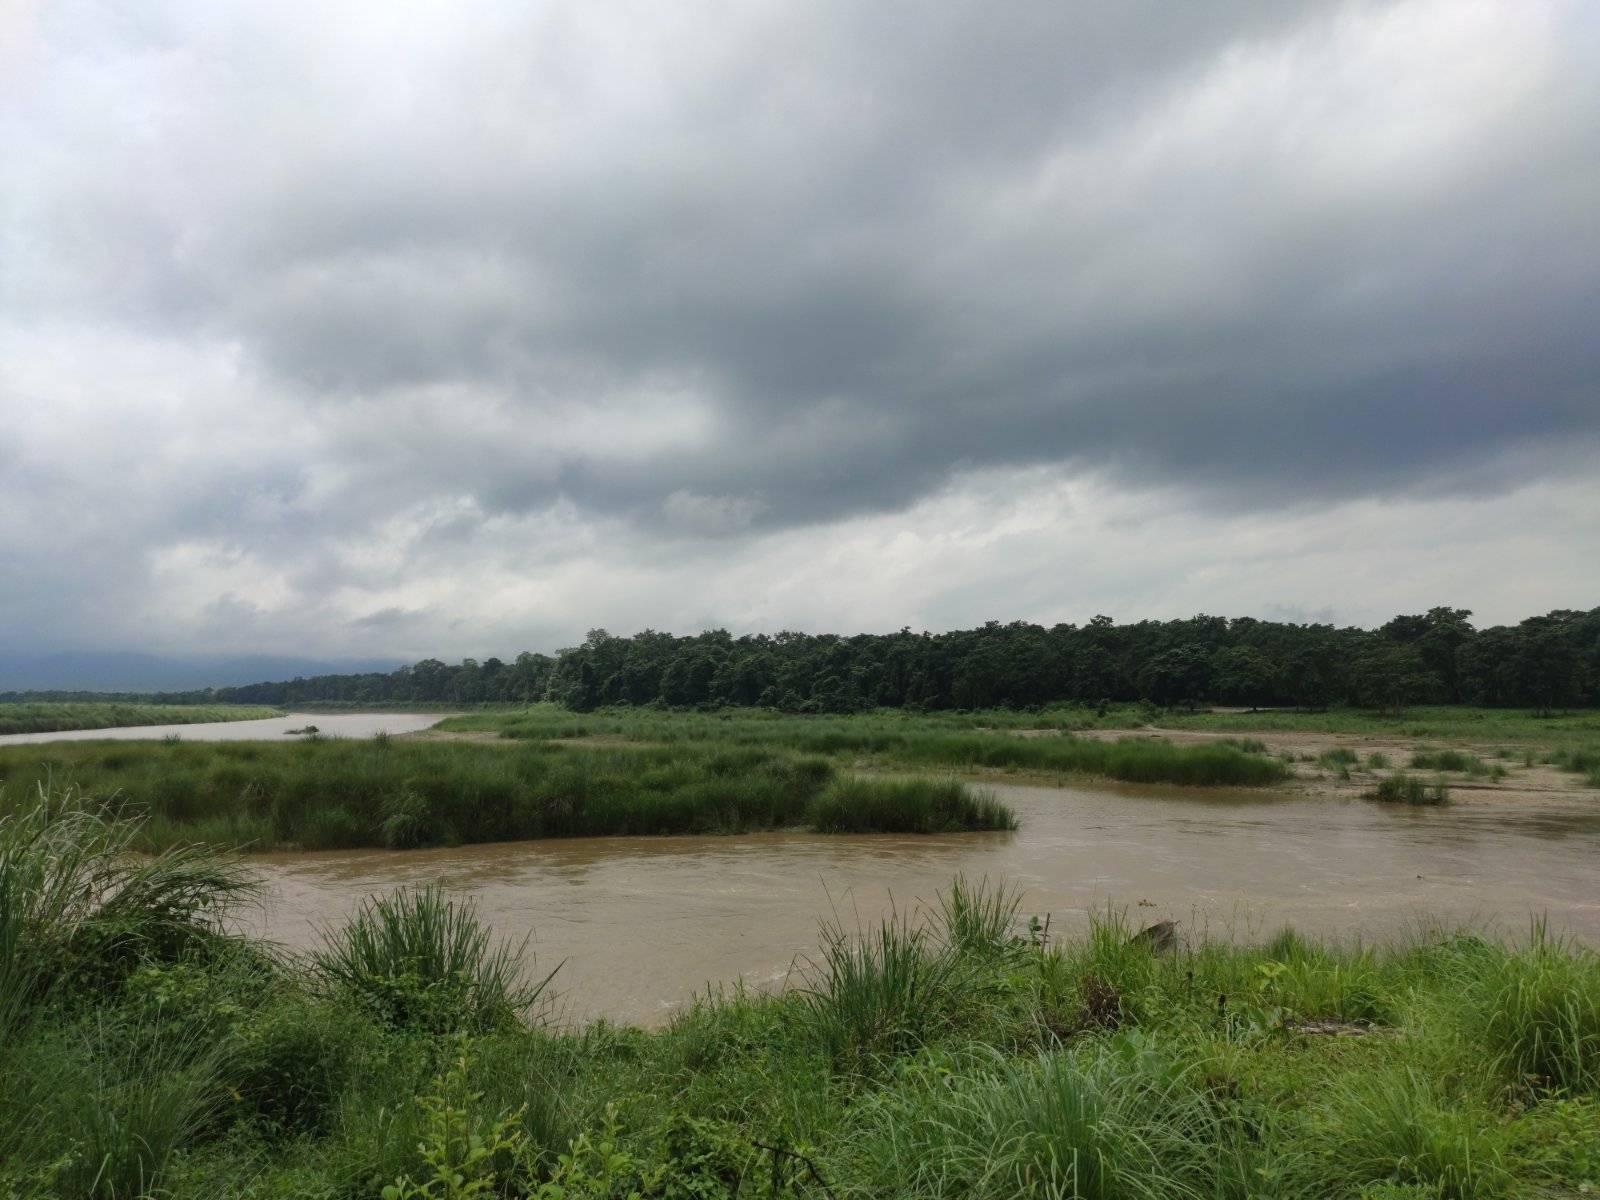 Chitwan National Park.The river has become has turned muddy because of the monsoon rain here. June/July is the time frame of monsoon here in Nepal.